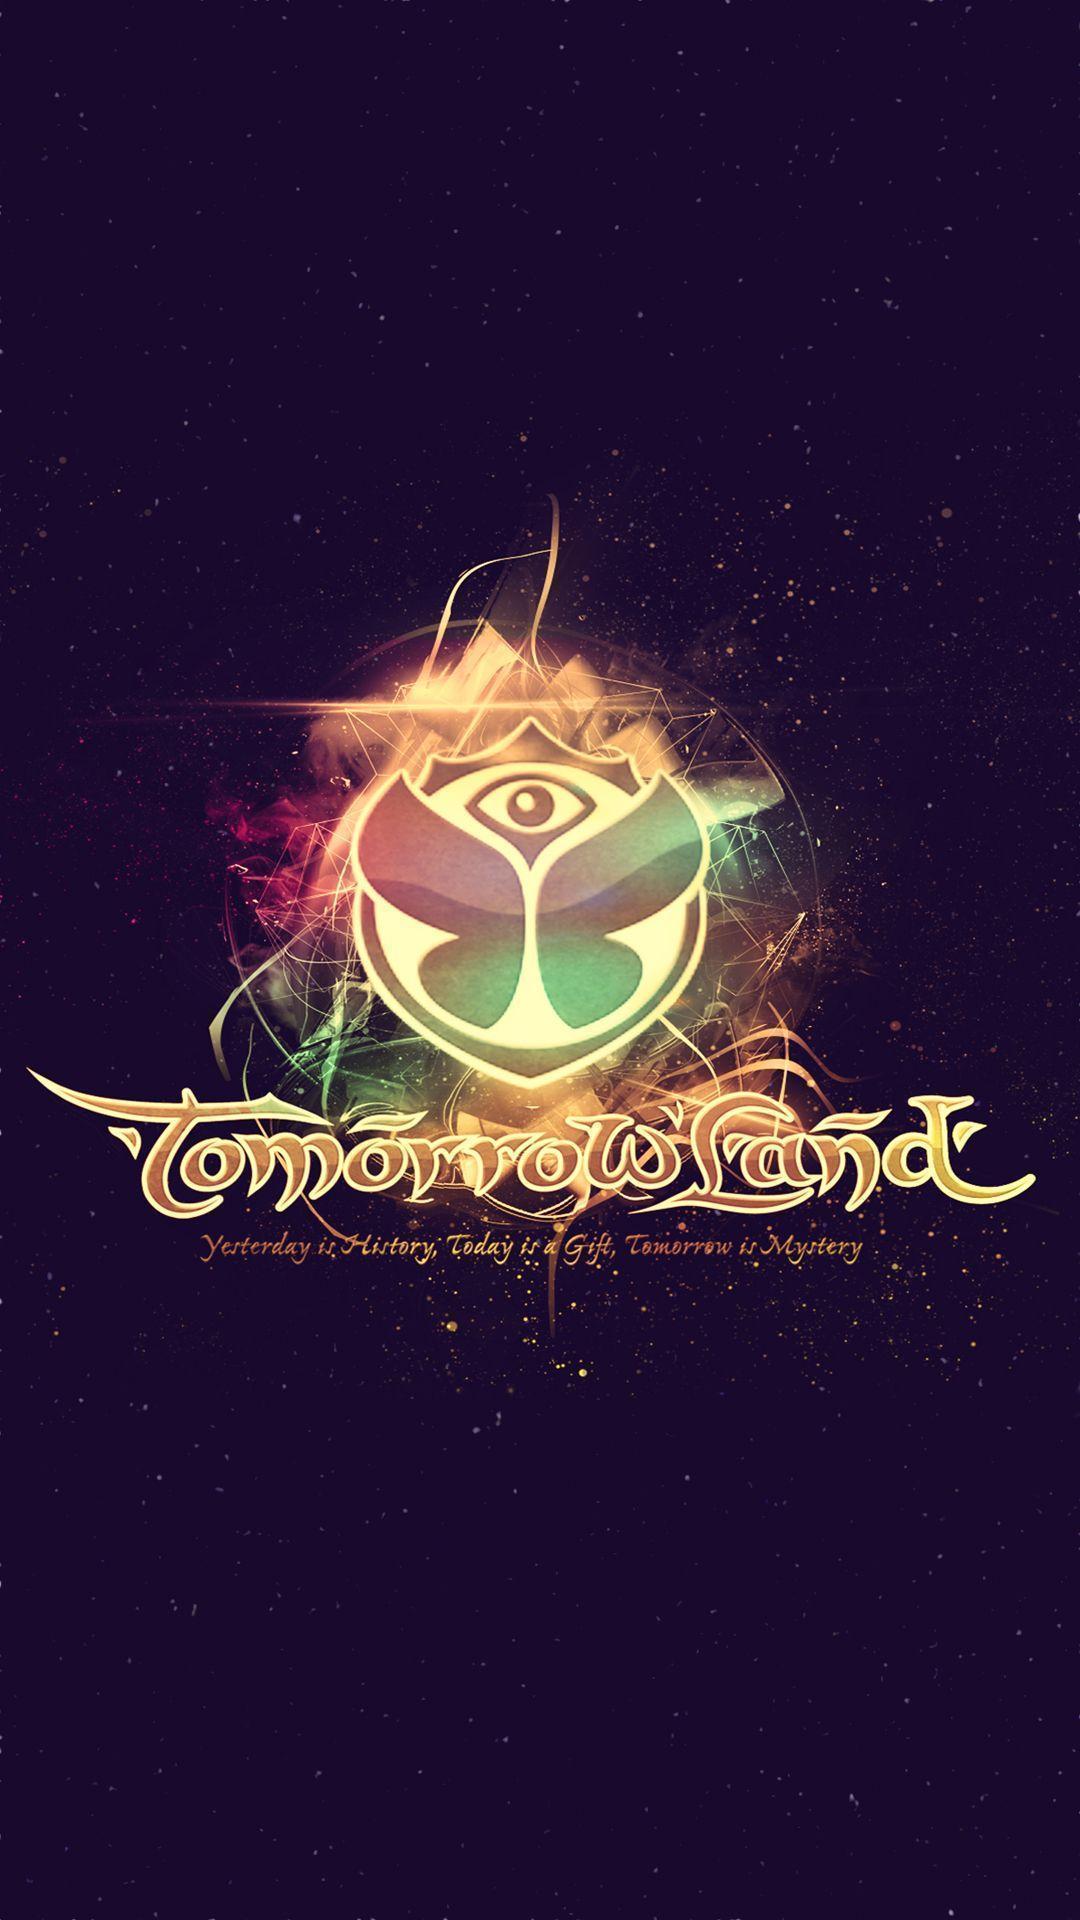 Tomorrowland 2014 Electronic Music Festival Logo Android Wallpaper